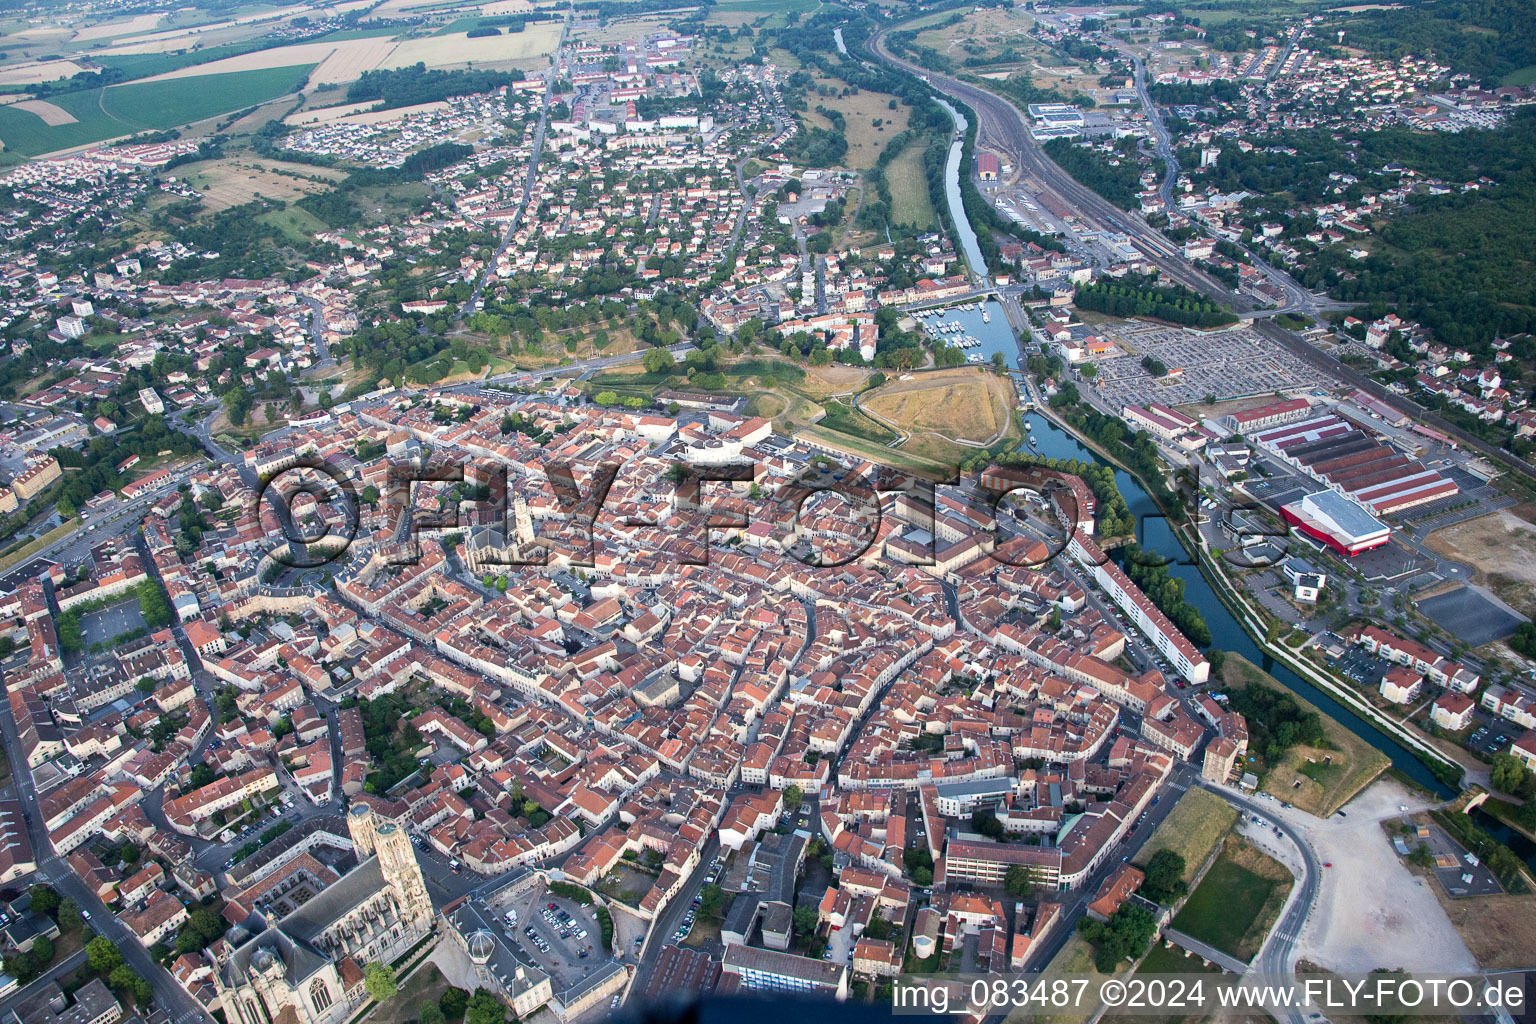 Drone recording of Toul in the state Meurthe et Moselle, France